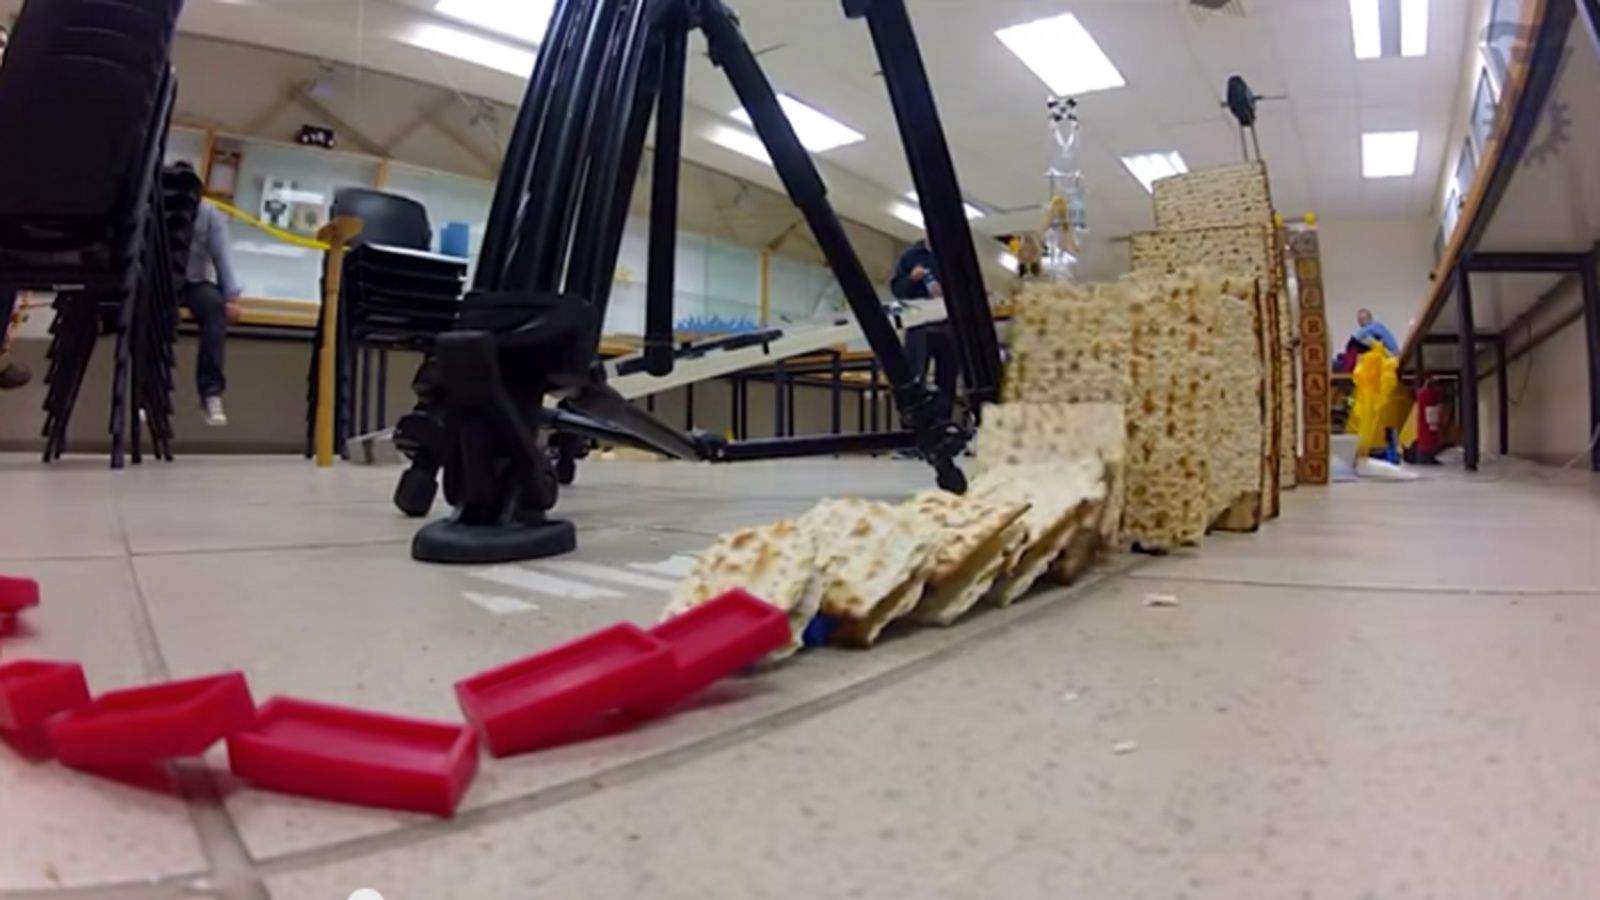 This Rube Goldberg Machine made by students at Technion in Cleveland quickly runs through the story of Passover. Photo: Technion/YouTube